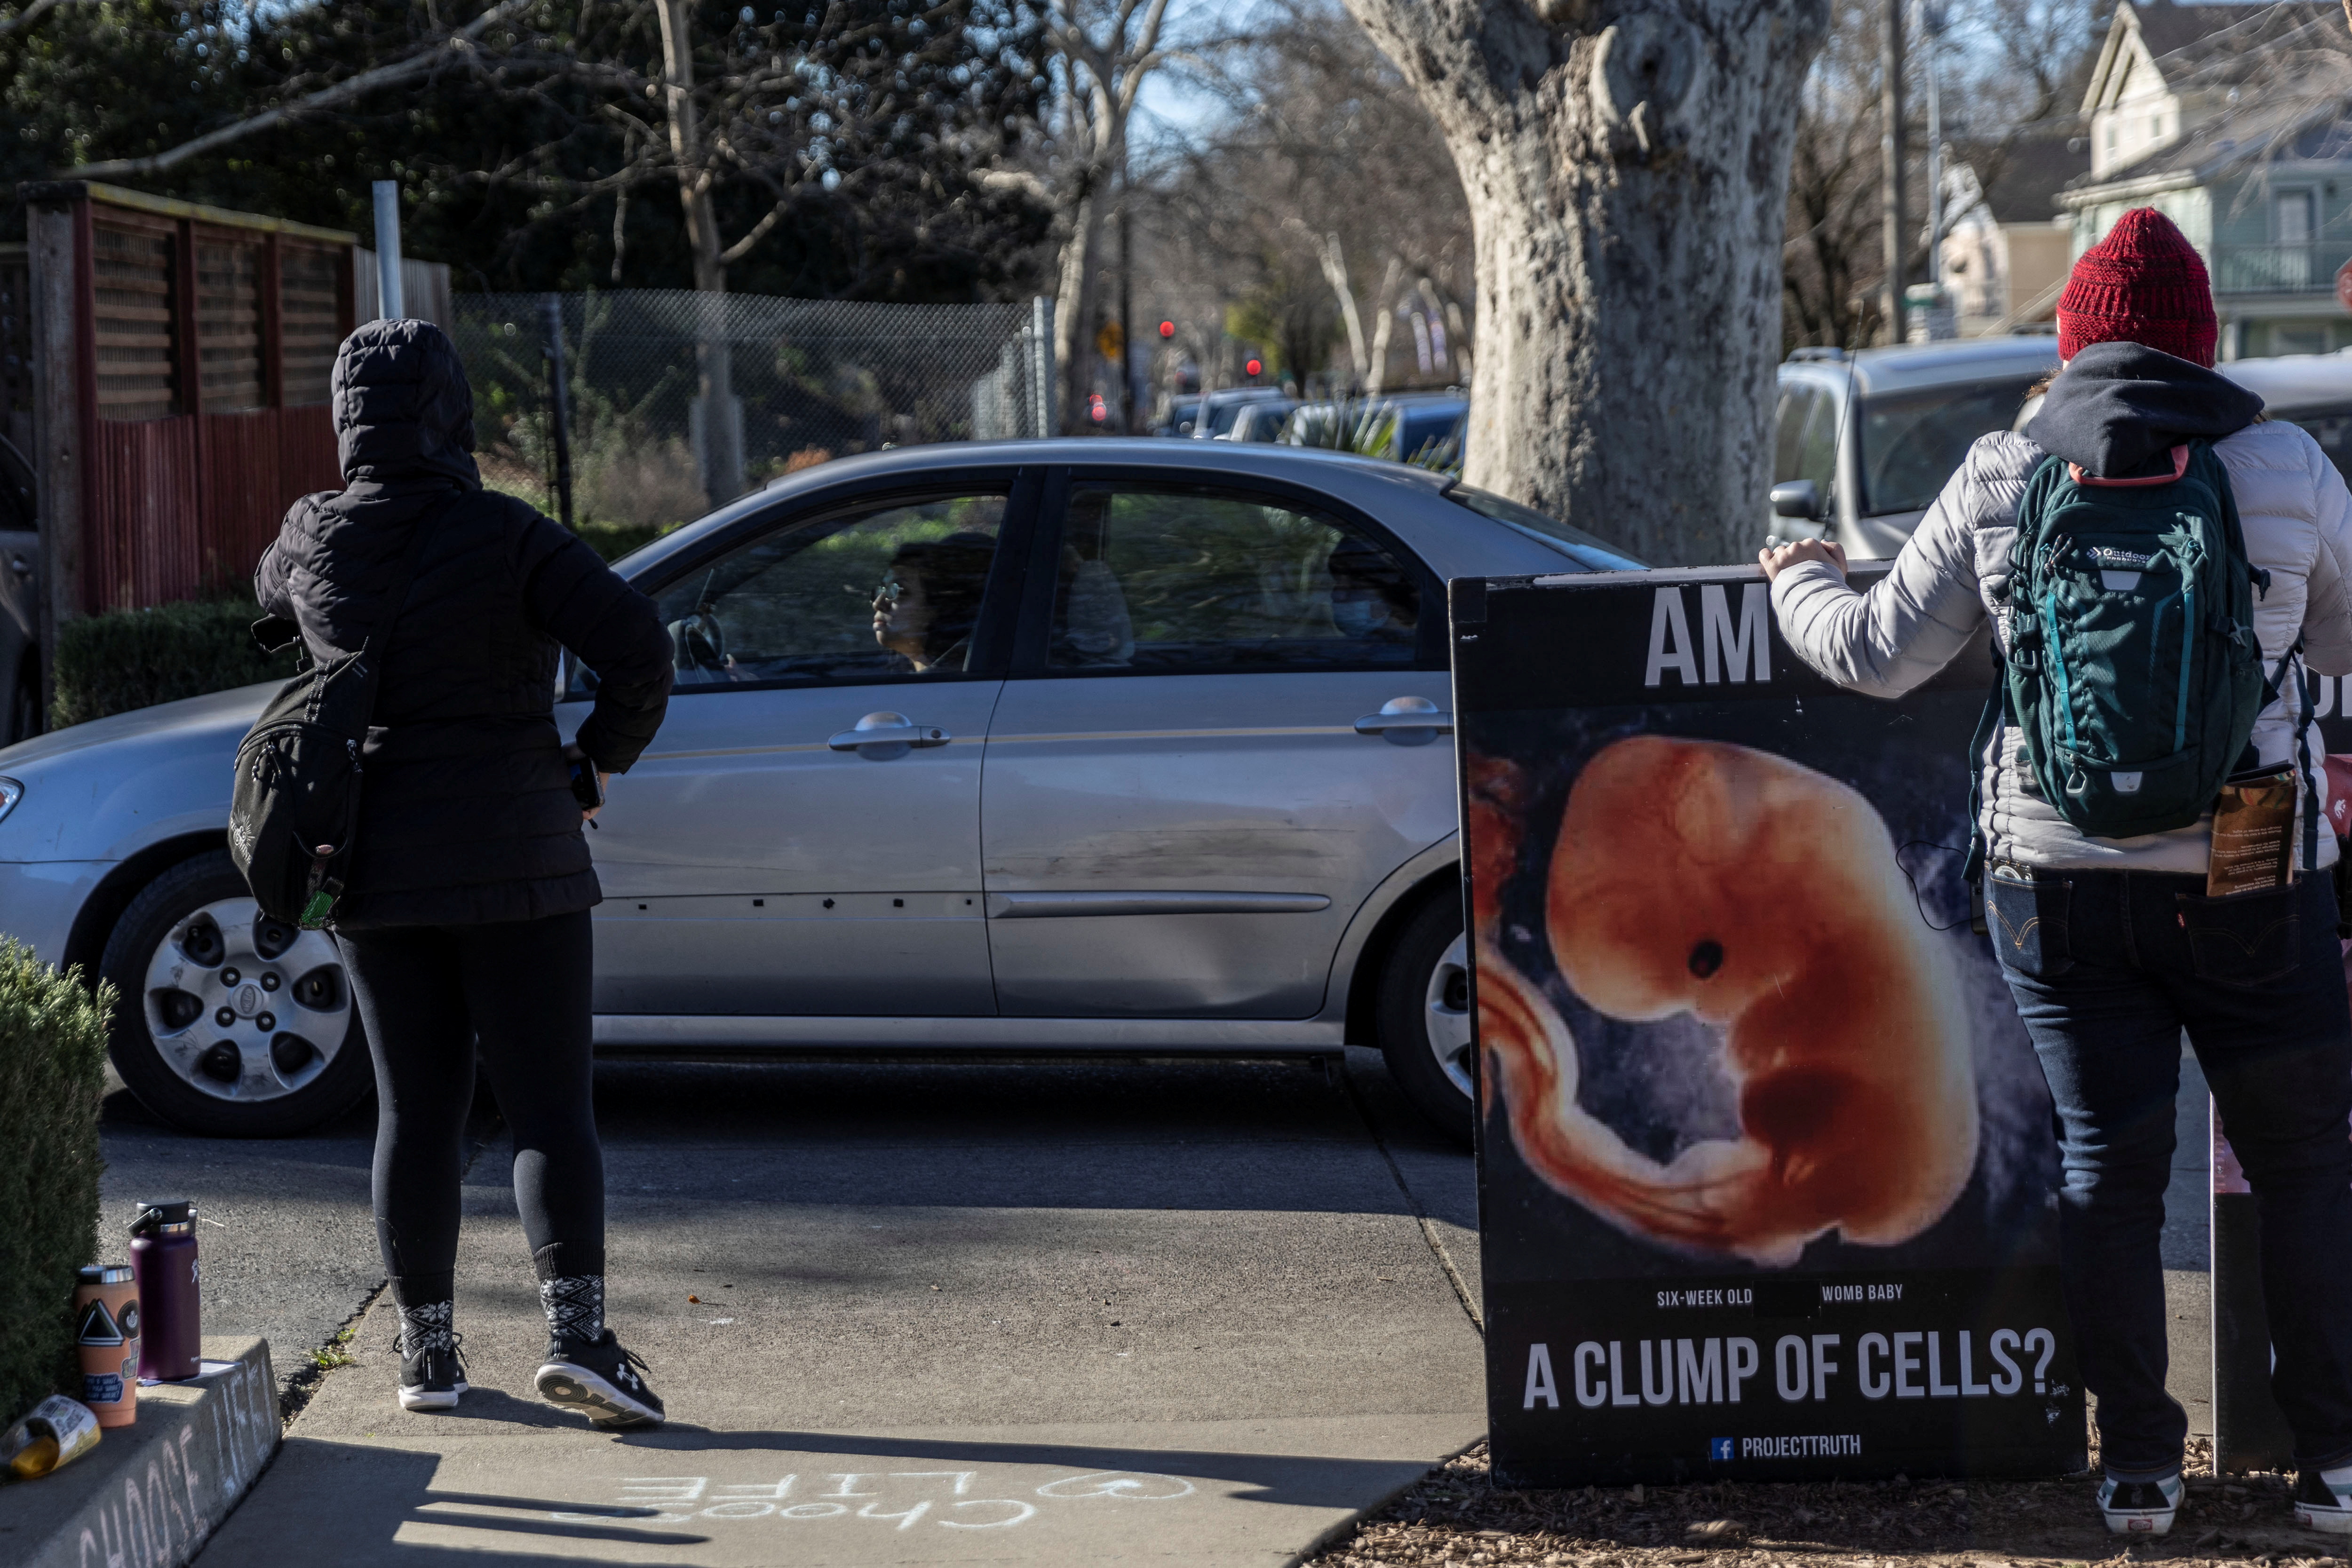 Local residents attend a weekly protest outside the Planned Parenthood Health Center in Sacramento, California